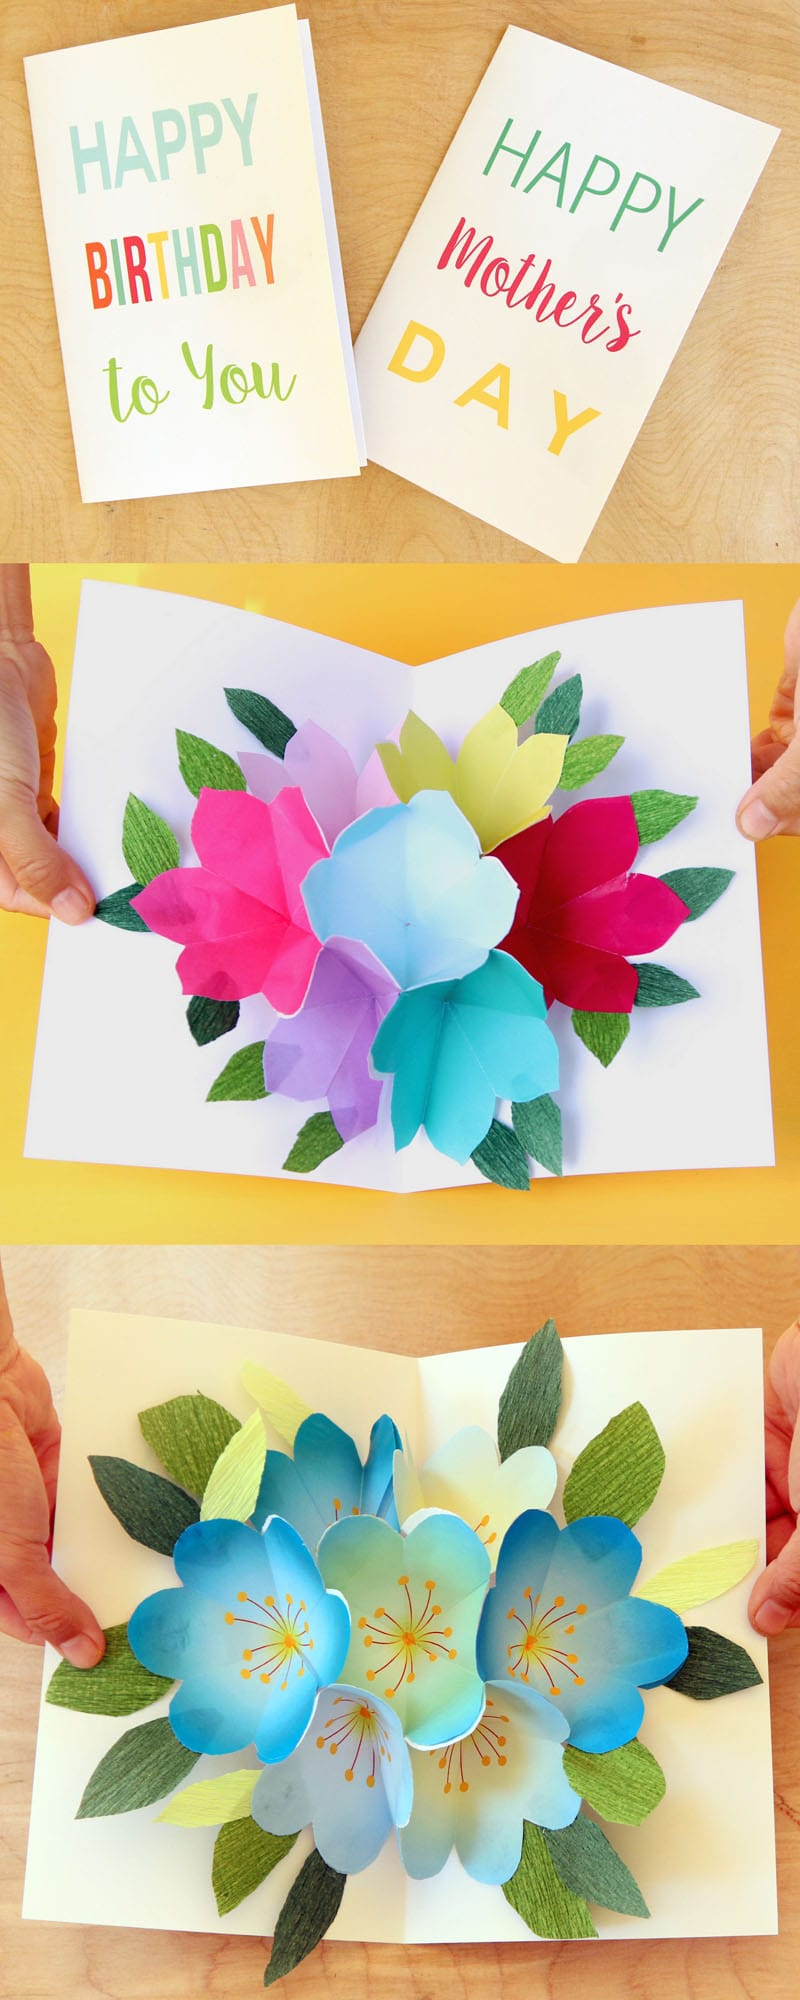 Free Printable Happy Birthday Card With Pop Up Bouquet - A Piece Of - Free Printable Pop Up Card Templates